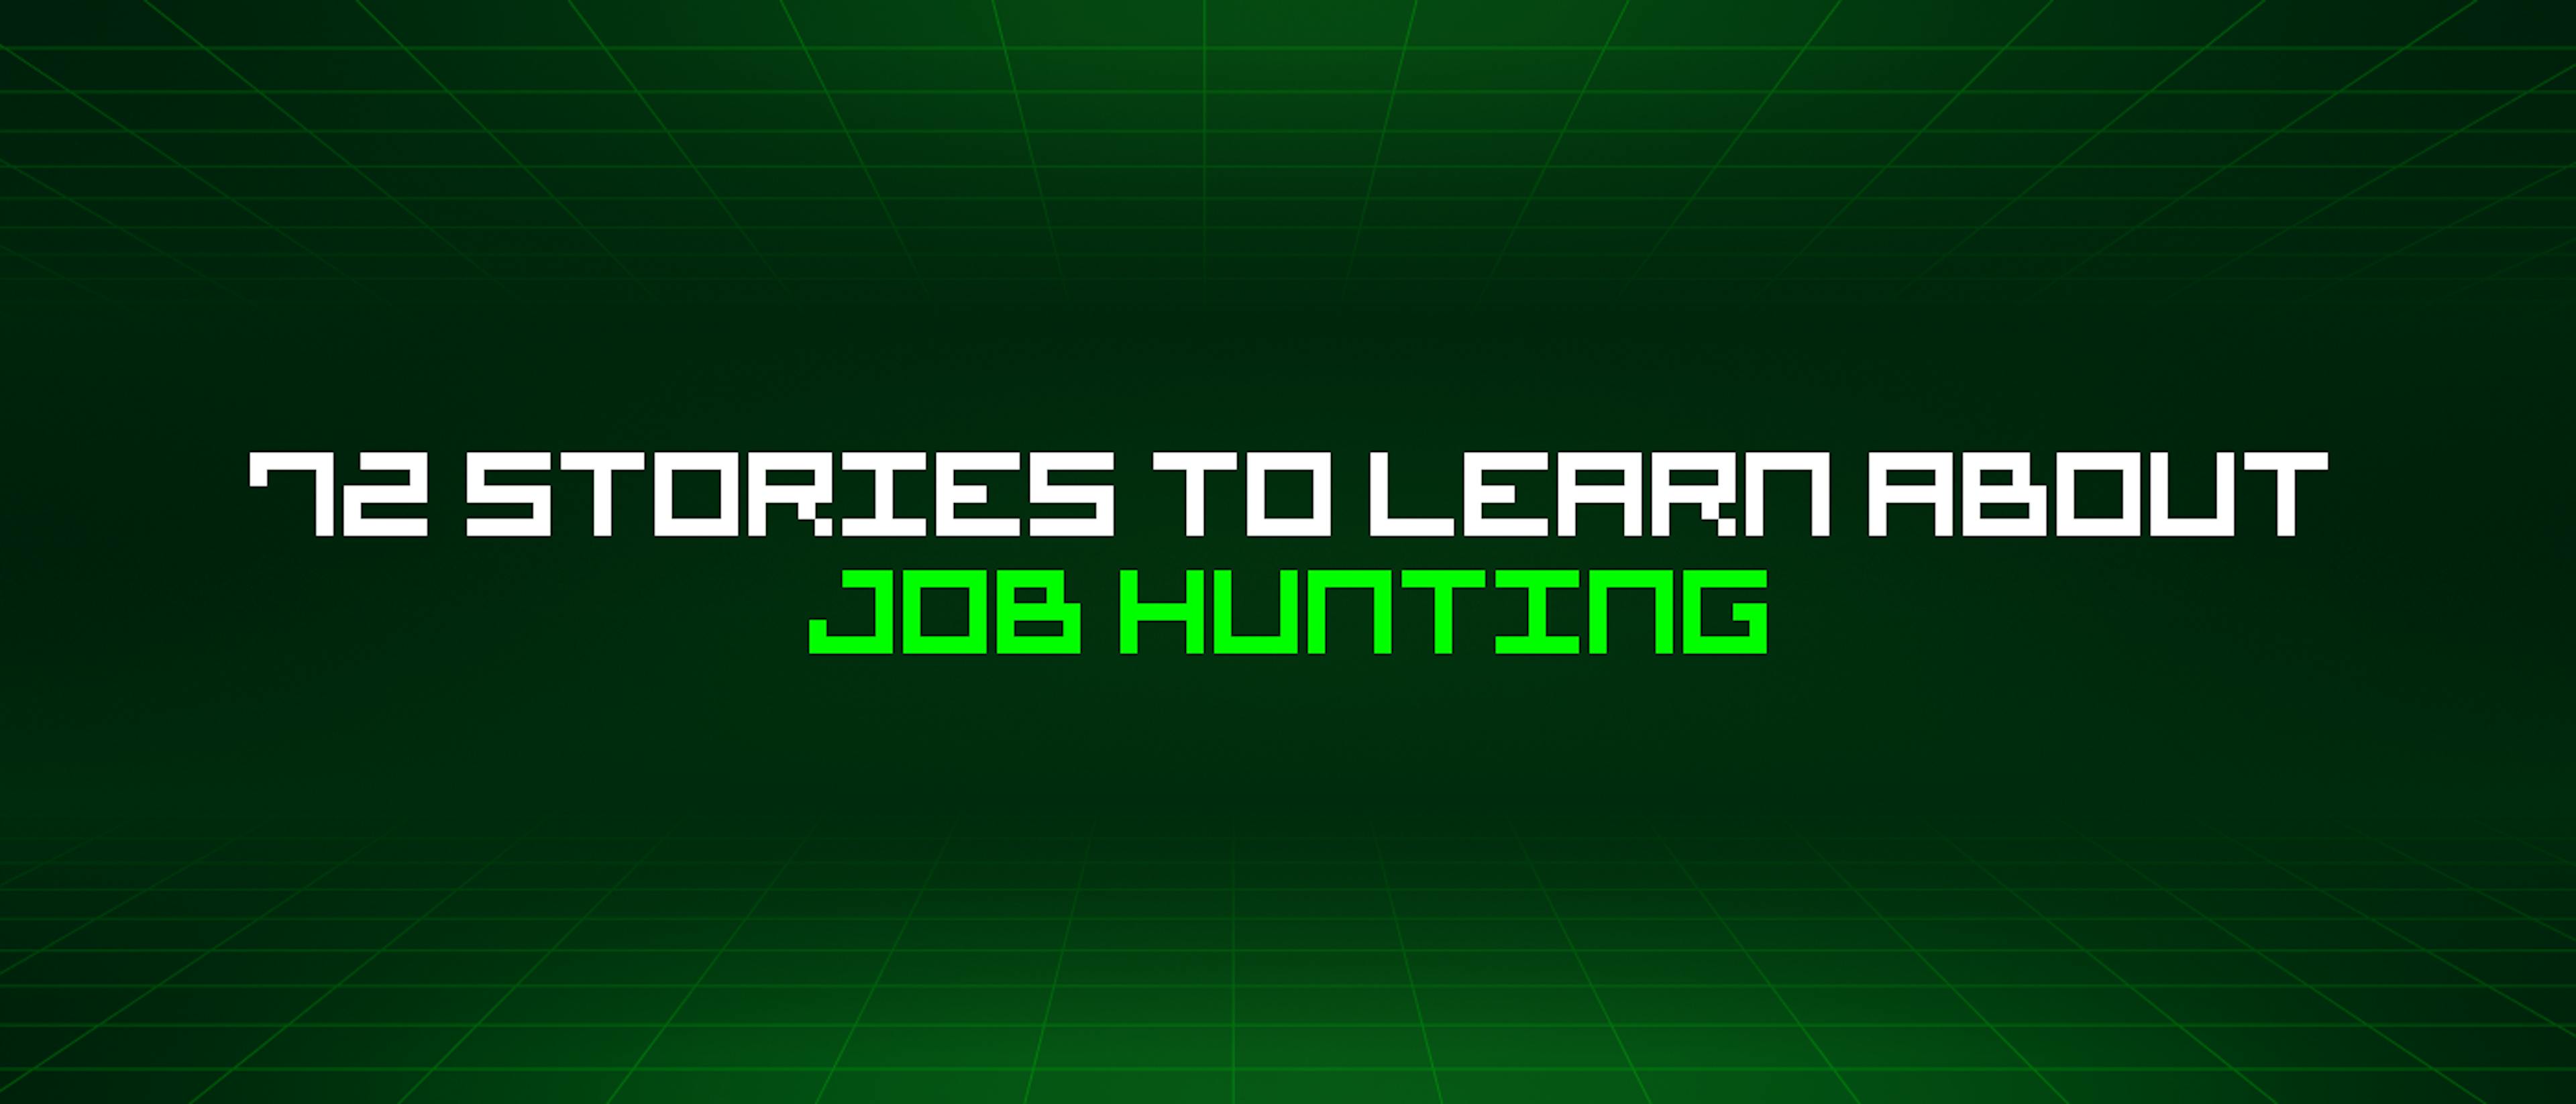 featured image - 72 Stories To Learn About Job Hunting